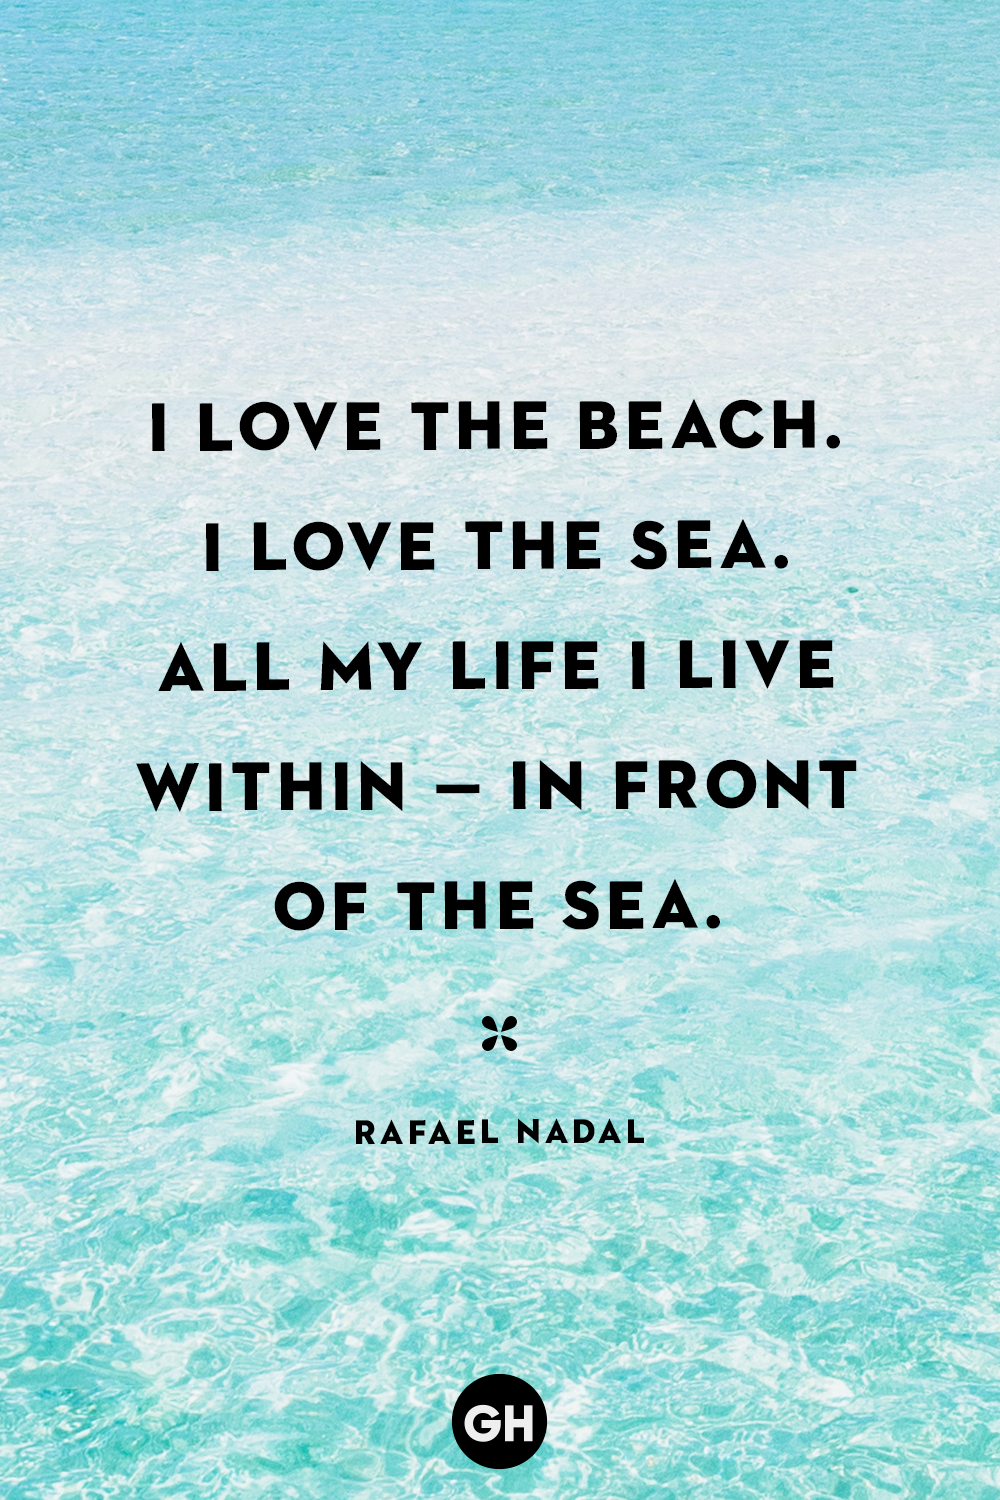 30 Best Beach Quotes Sayings And Quotes About The Beach